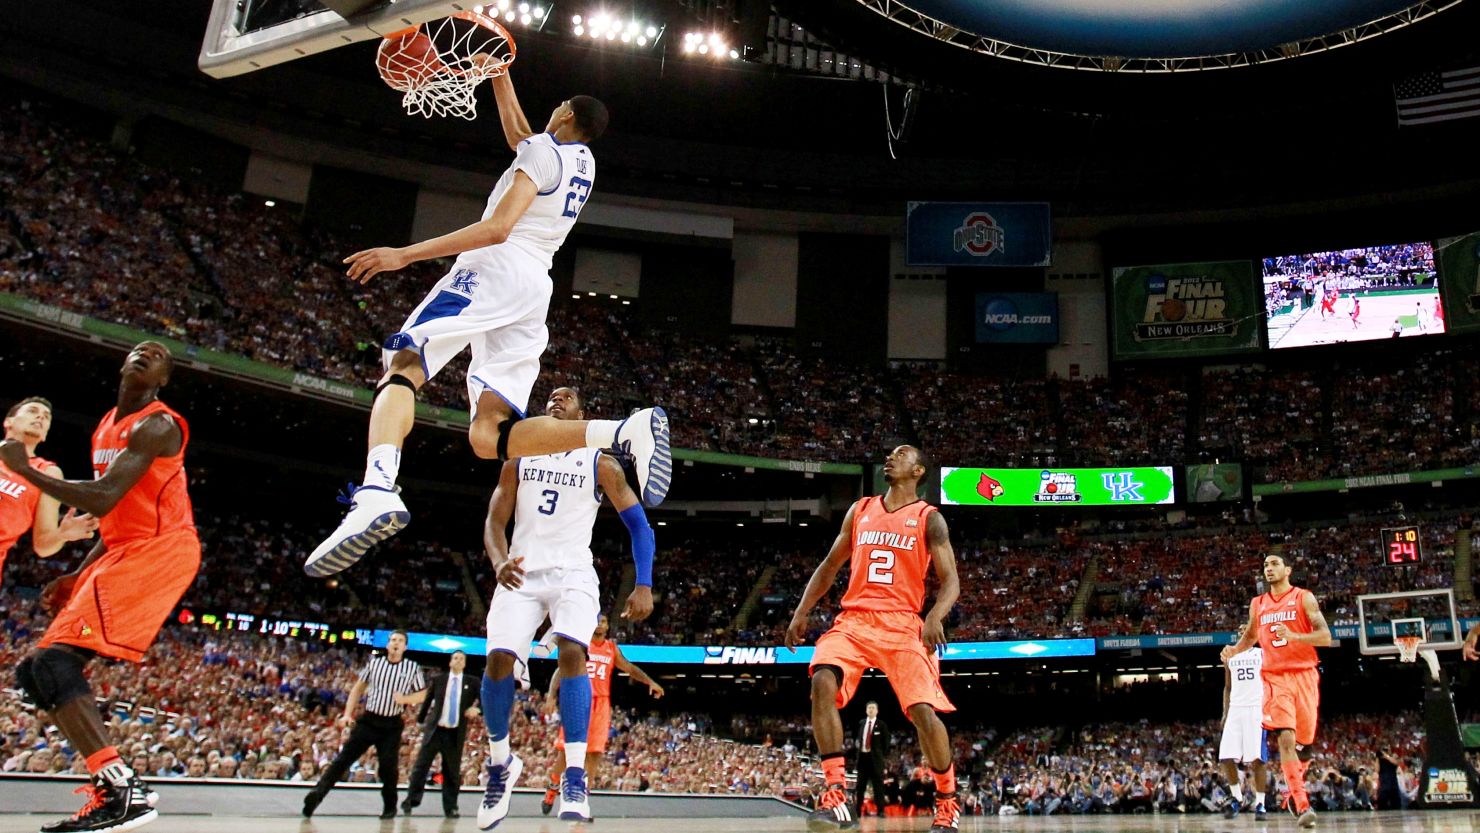 Kentucky's Anthony Davis dunks on Louisville during the Wildcats' 69-61 semifinal victory Saturday night in New Orleans.